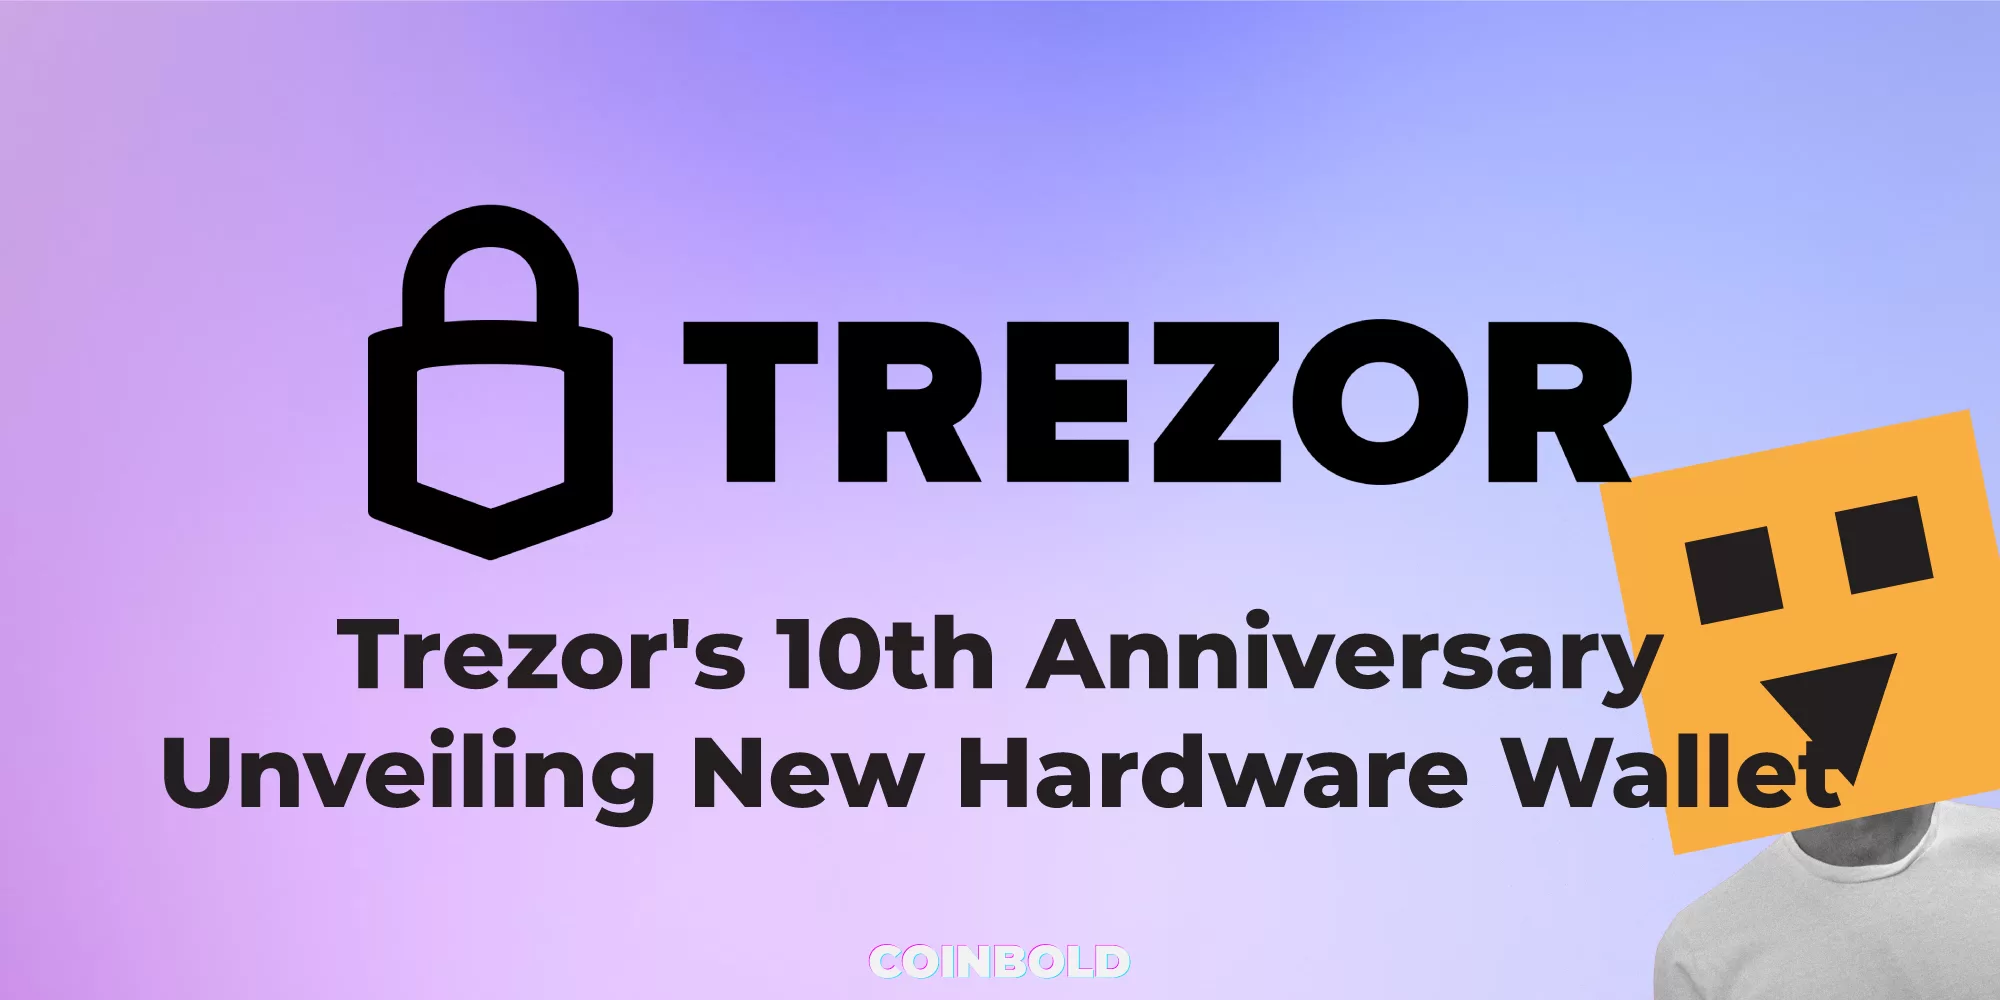 Trezor's 10th Anniversary Unveiling New Hardware Wallet